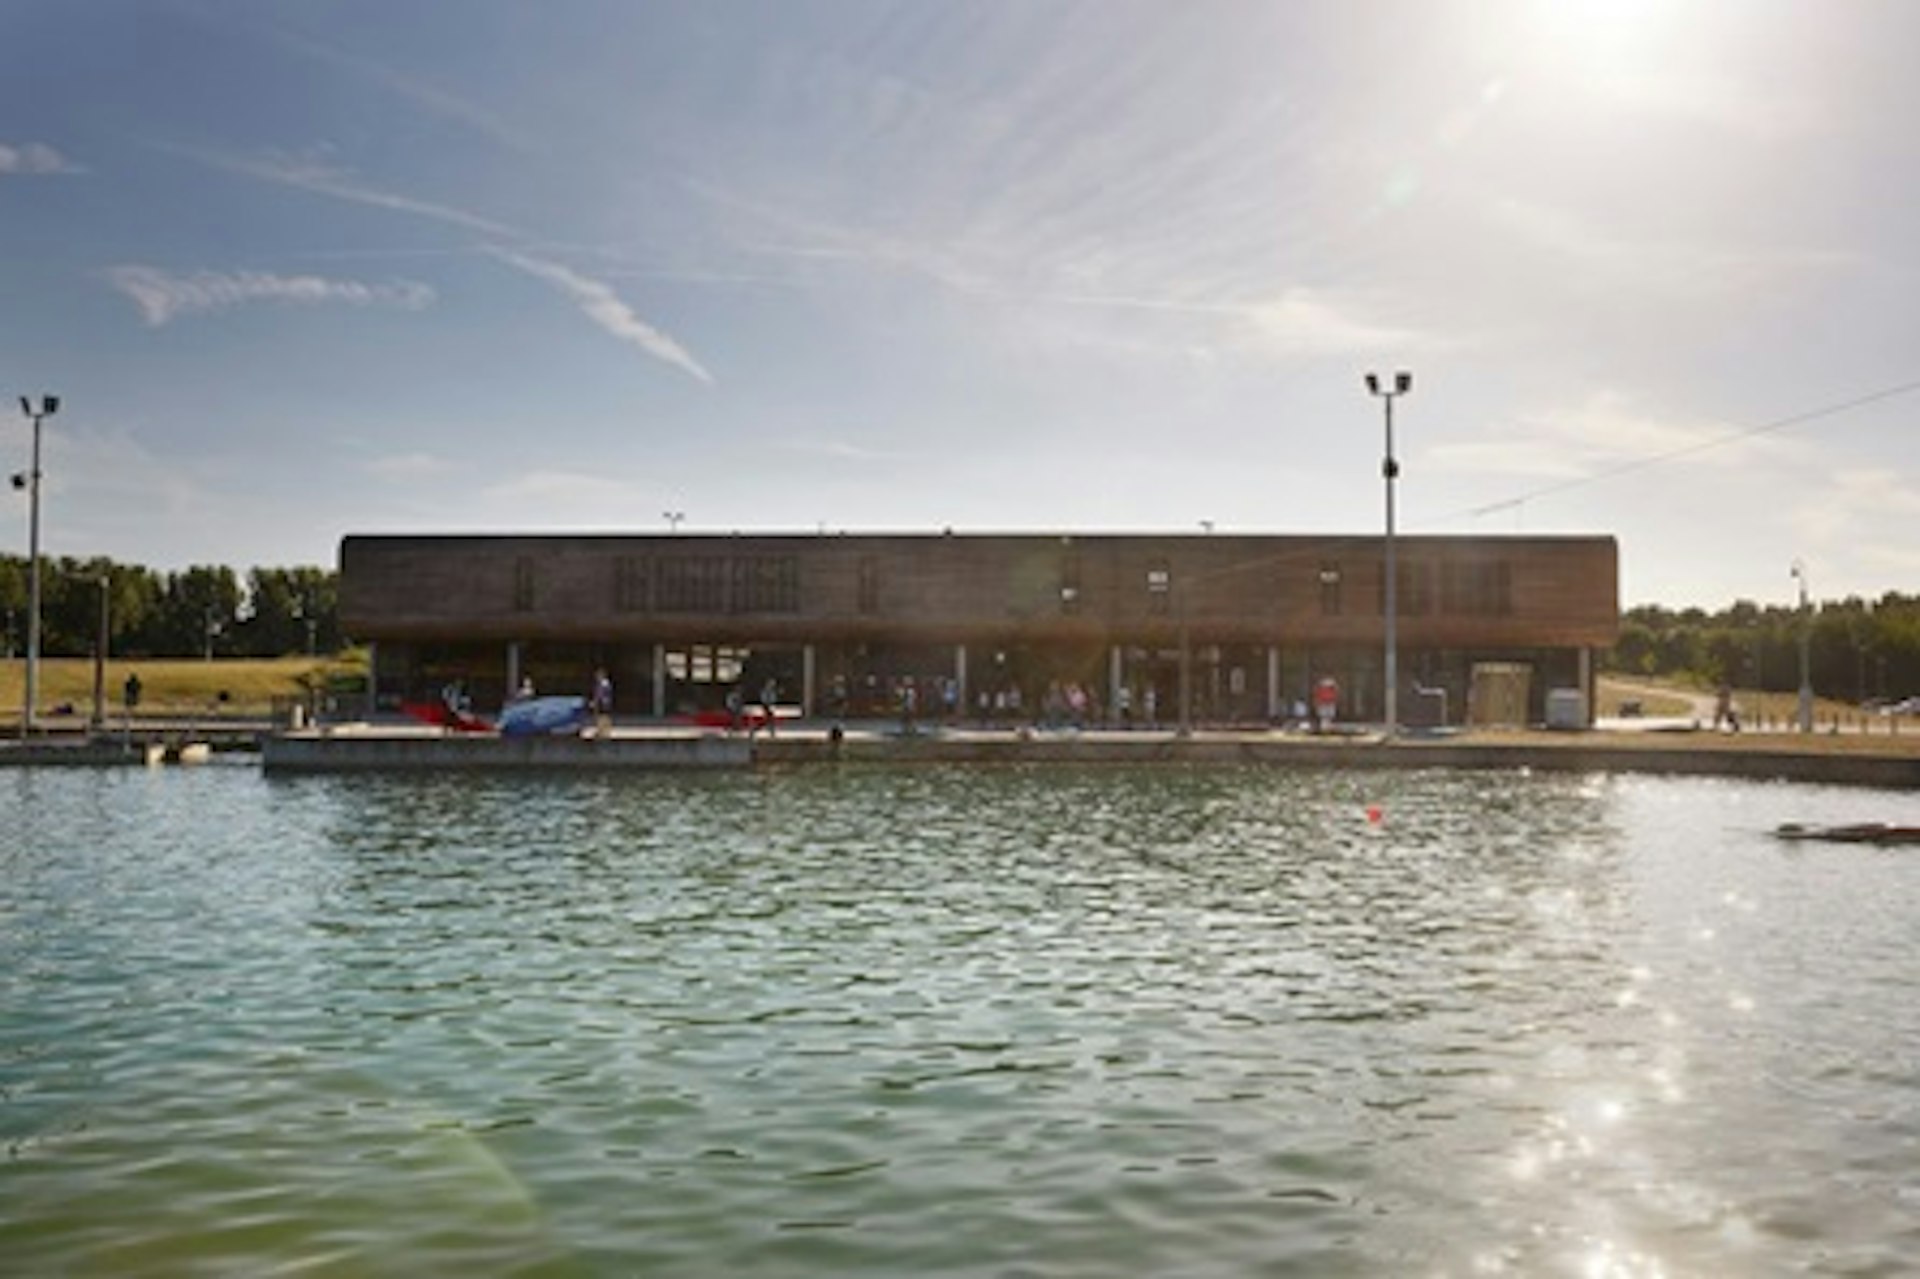 Hydrospeeding Experience for Two at Lee Valley White Water Centre 4